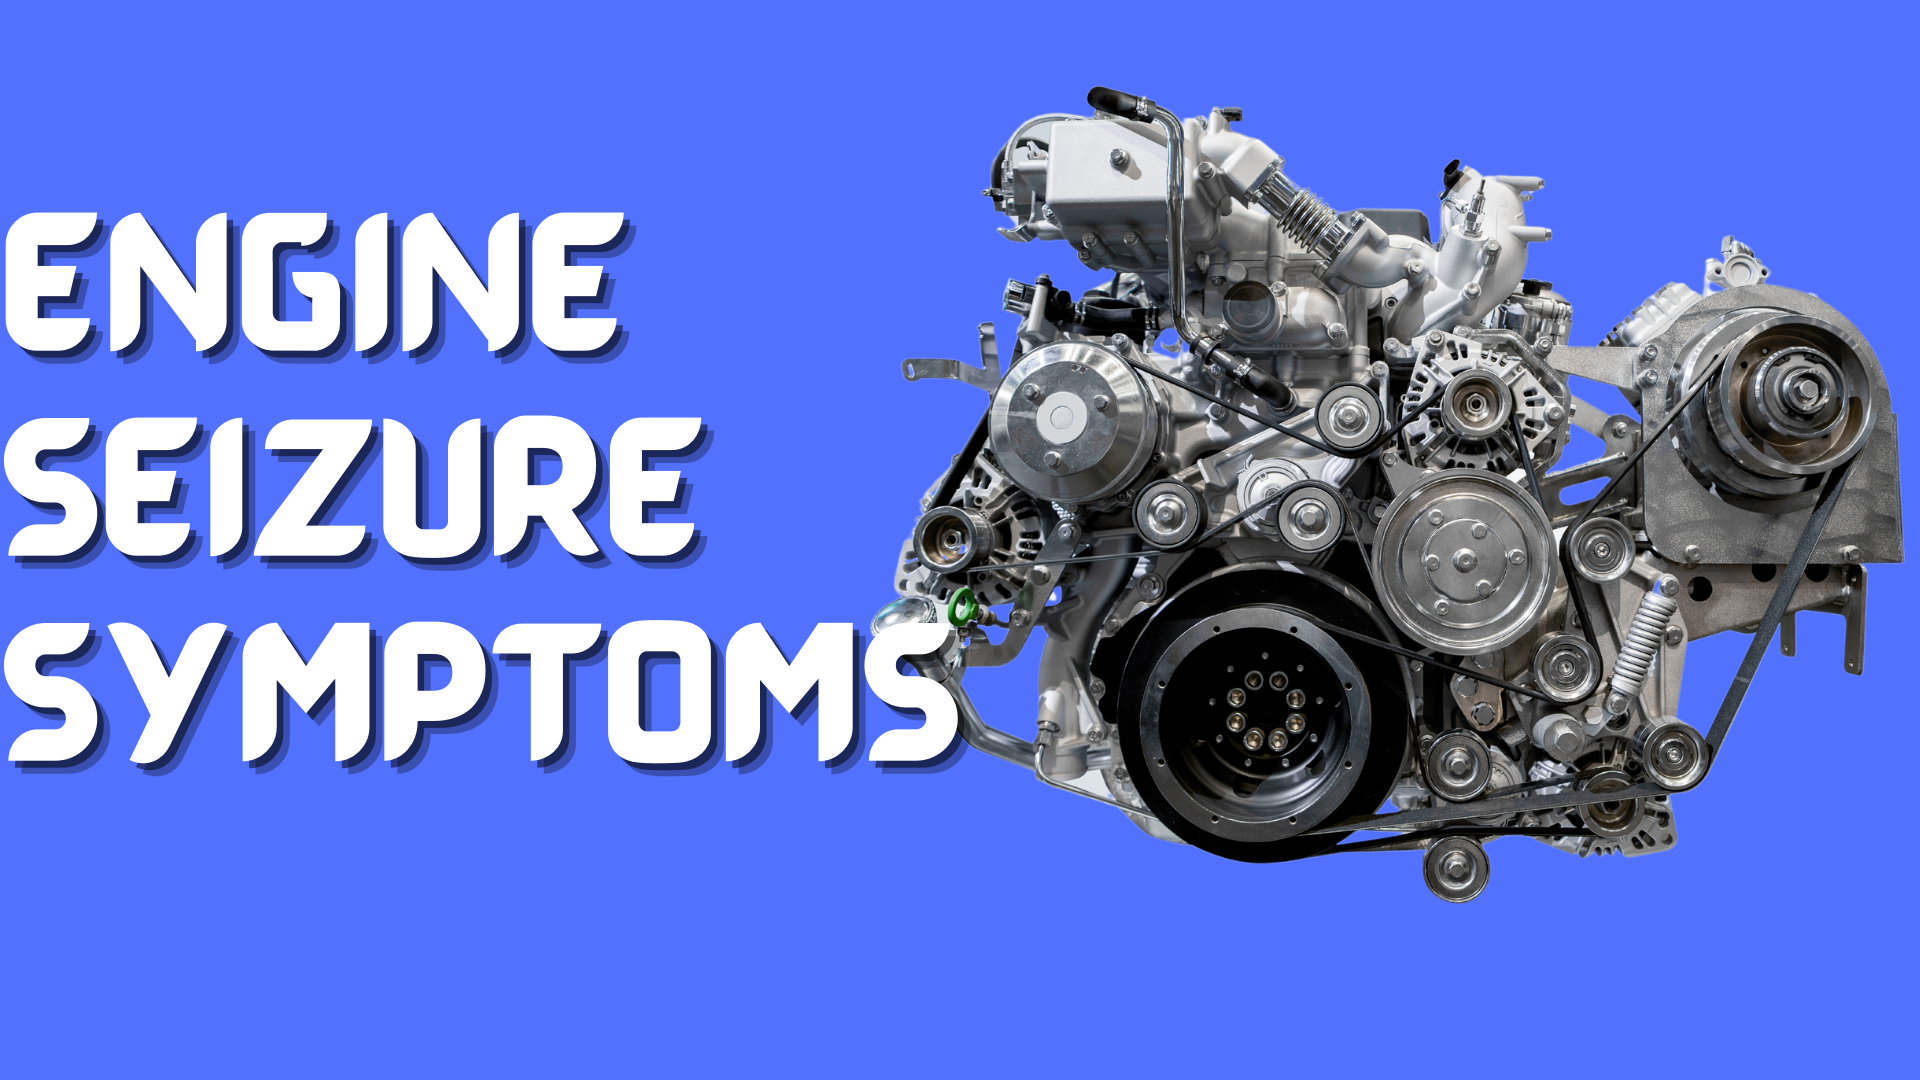 3 Symptoms of a Seized Engine & What To Do